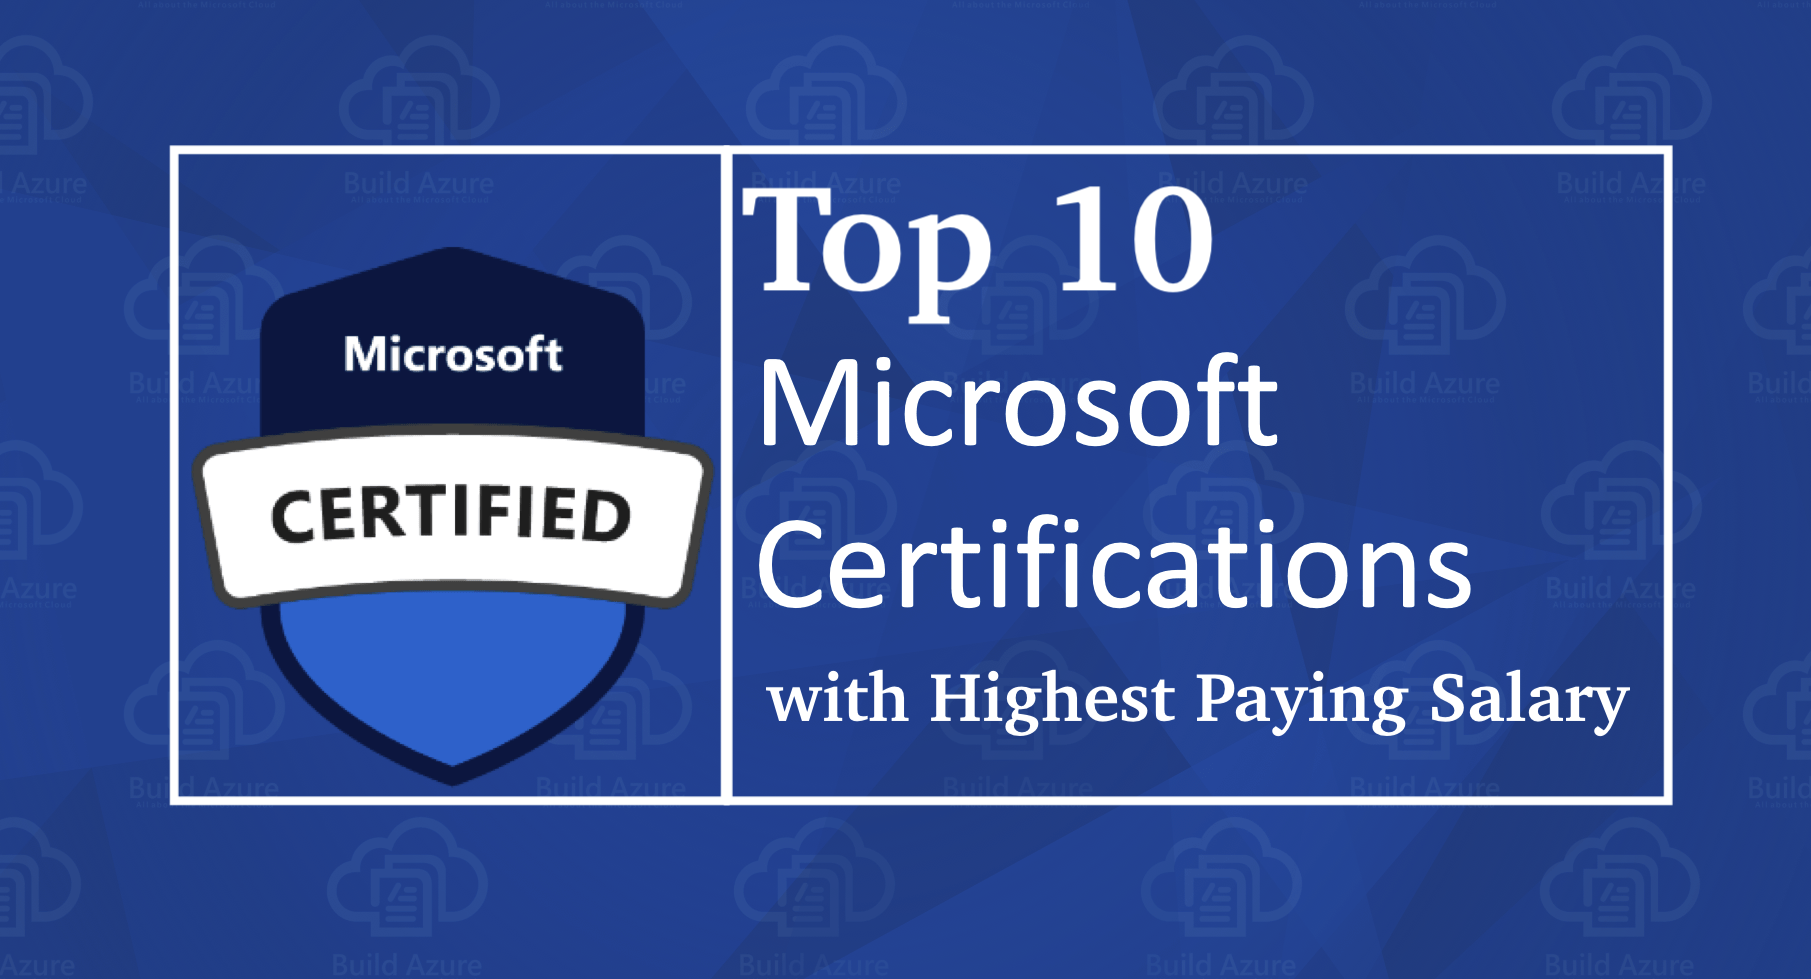 Microsoft Certifications with Highest Salary in Demand this Year